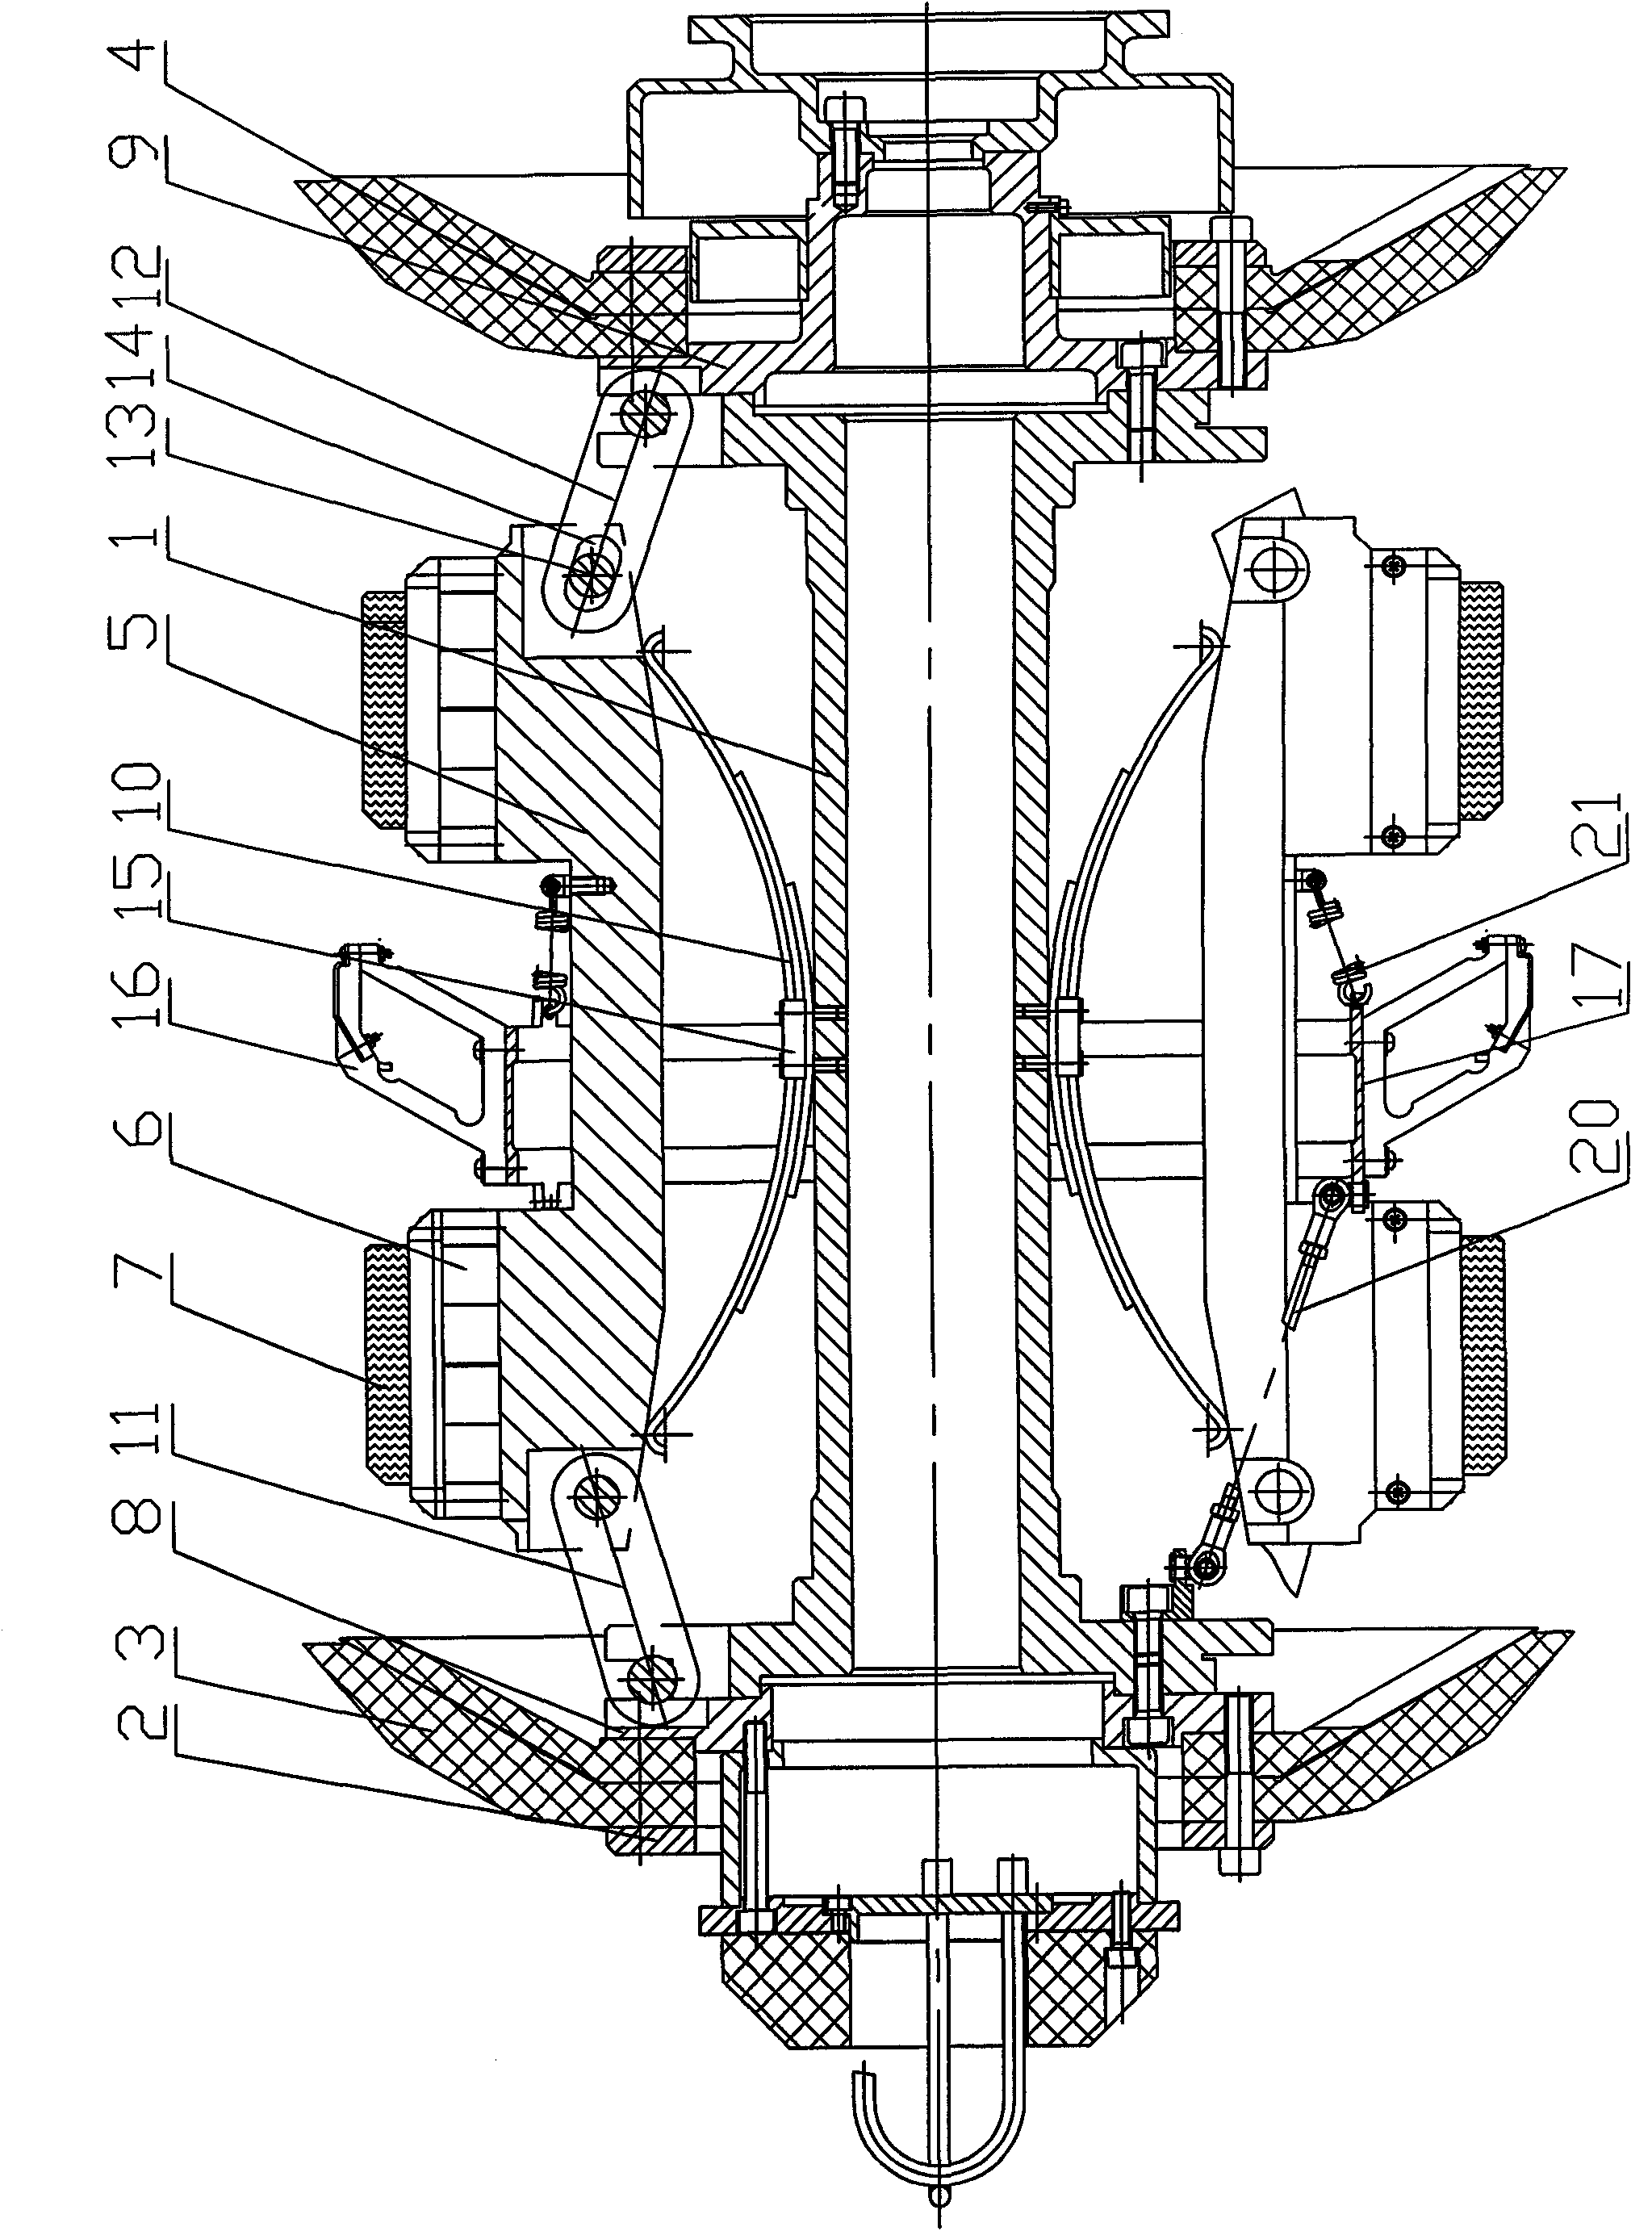 Pipeline defect and magnetic leakage detection device